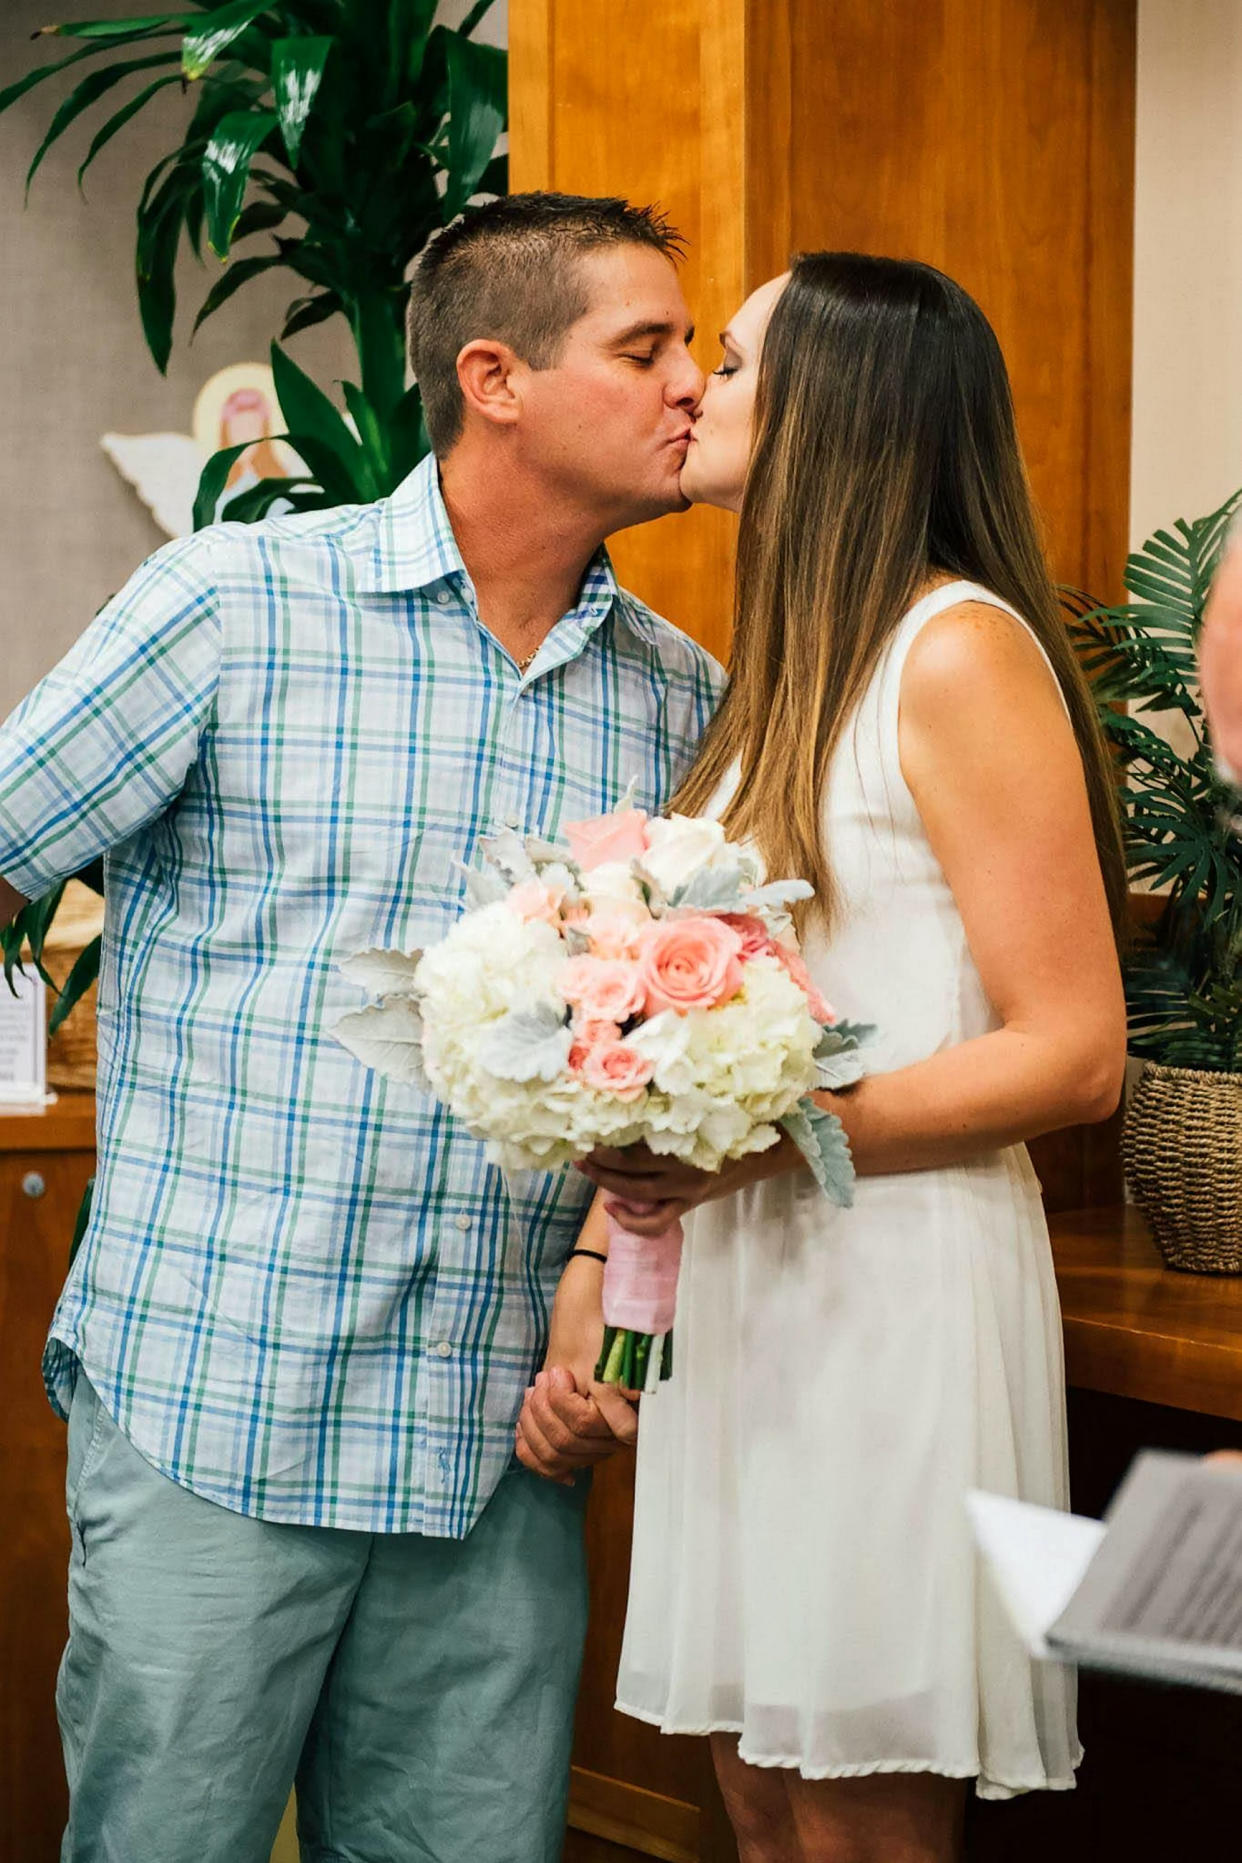 Sabrina and Justin Ernst wed in the chapel of a Florida hospital after their son developed a brain bleed. (Photo: Alicia Johnson Photography/SWNS)